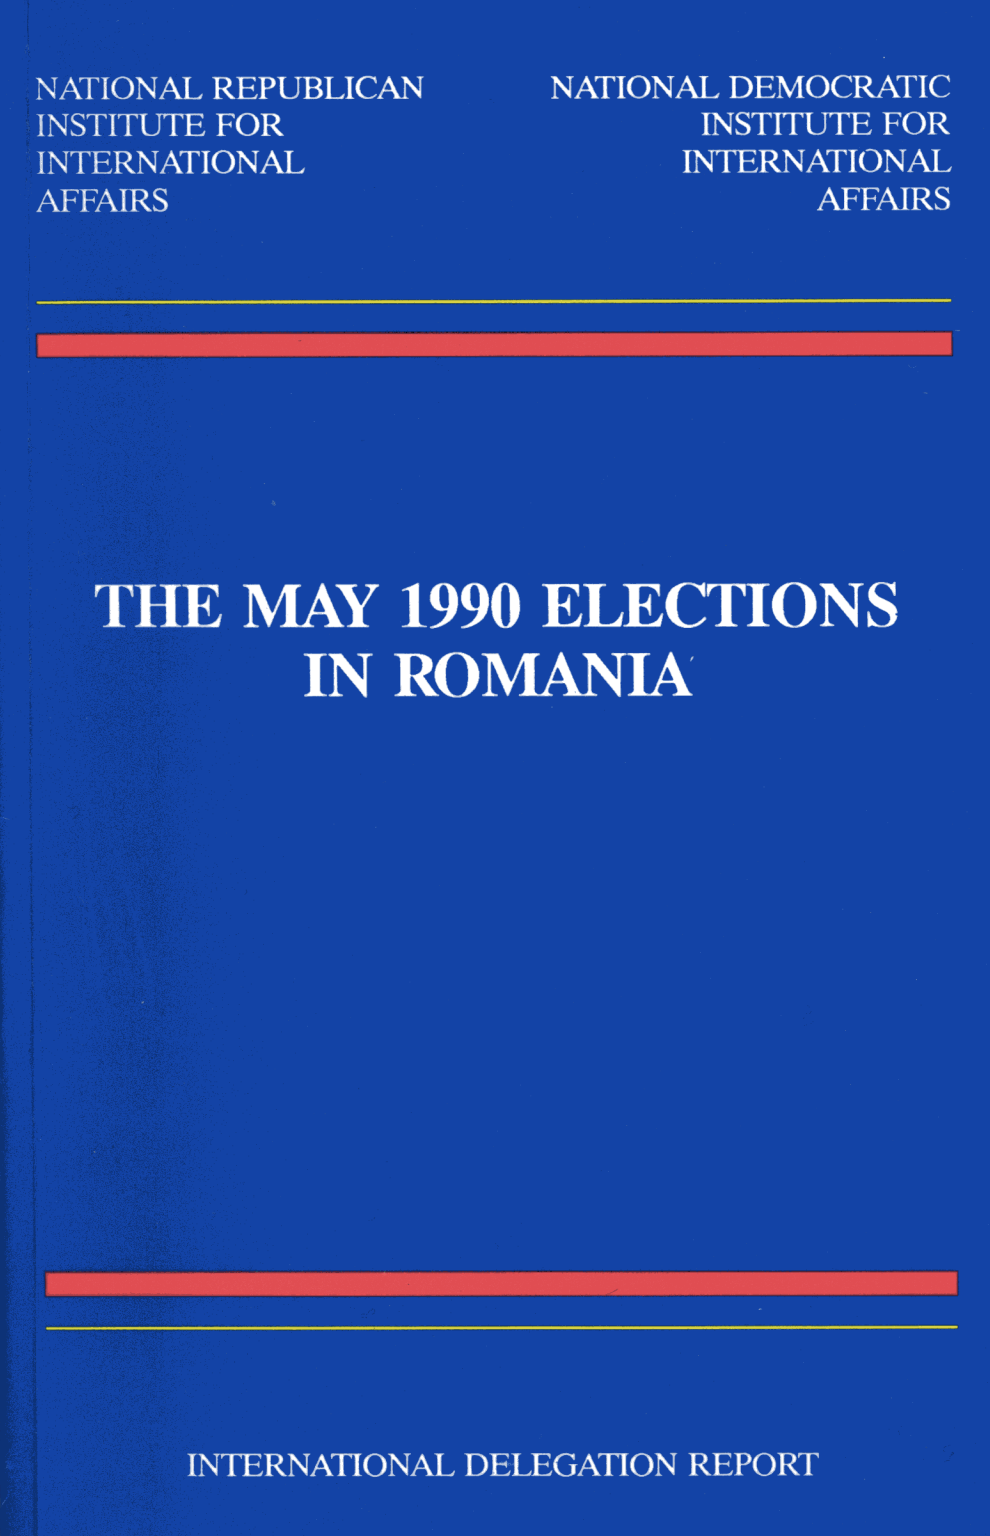 The May 1990 Elections in Romania: International Delegation Report